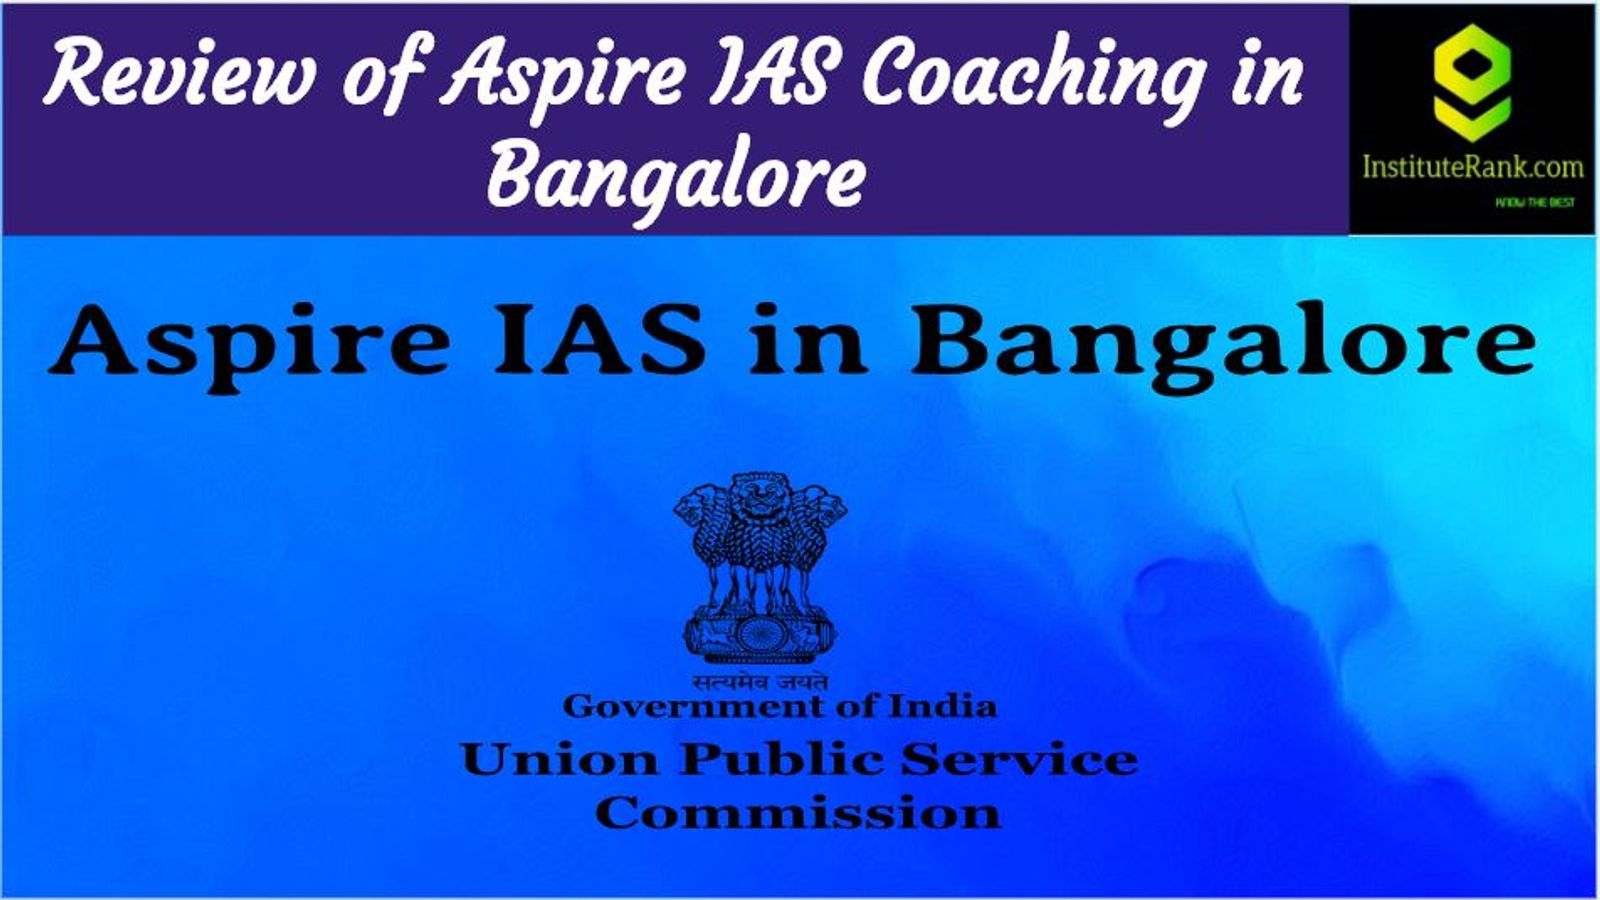 Aspire IAS in Bangalore Review